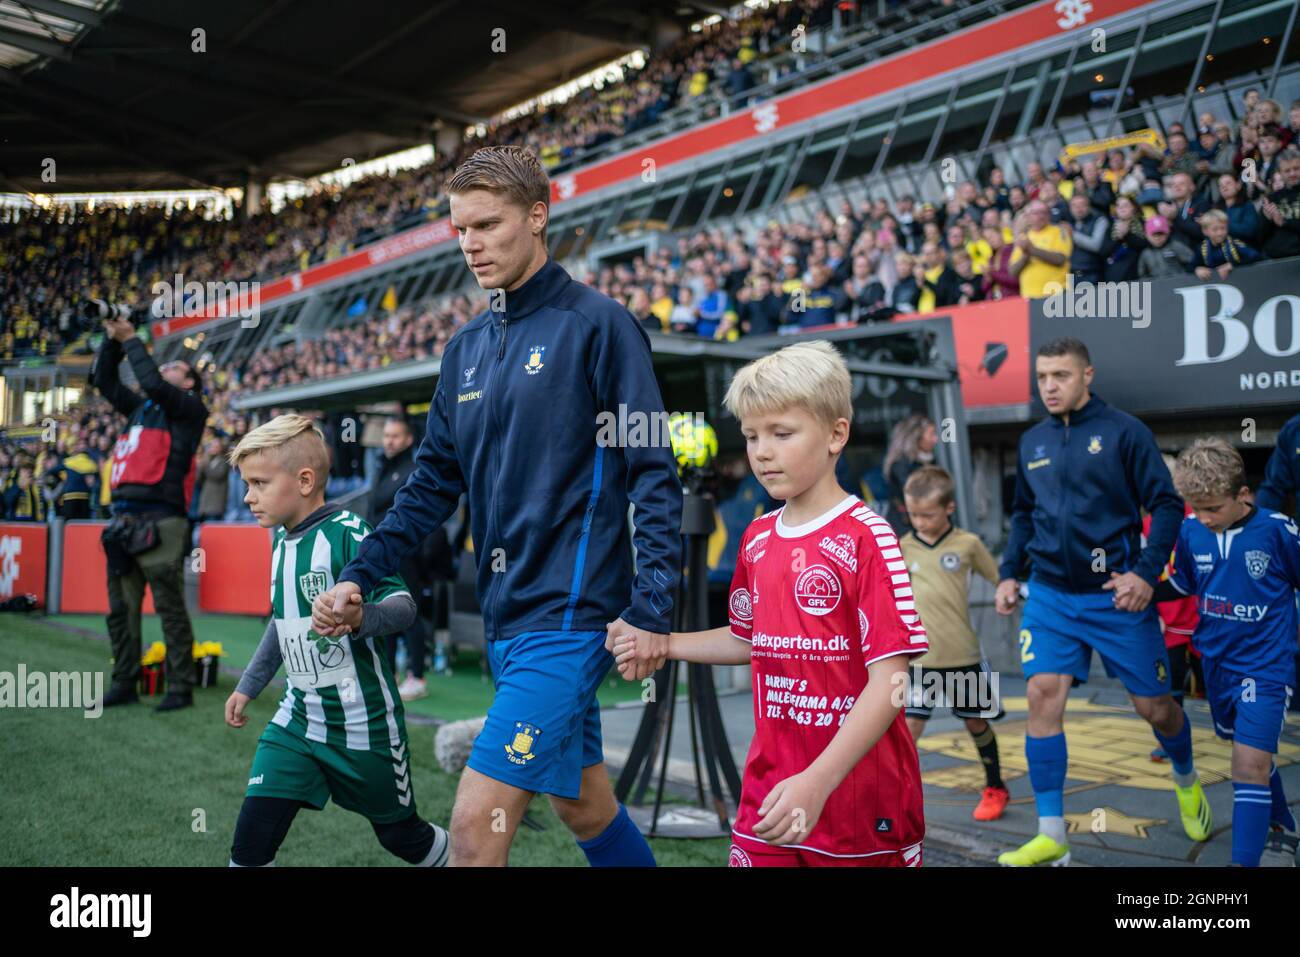 Brondby, Denmark. 26th Sep, 2021. Sigurd Rosted (4) of Broendby IF enters the pitch for the 3F Superliga match between Broendby IF and Aalborg Boldklub at Brondby Stadion. (Photo Credit: Gonzales Photo/Alamy Live News Stock Photo